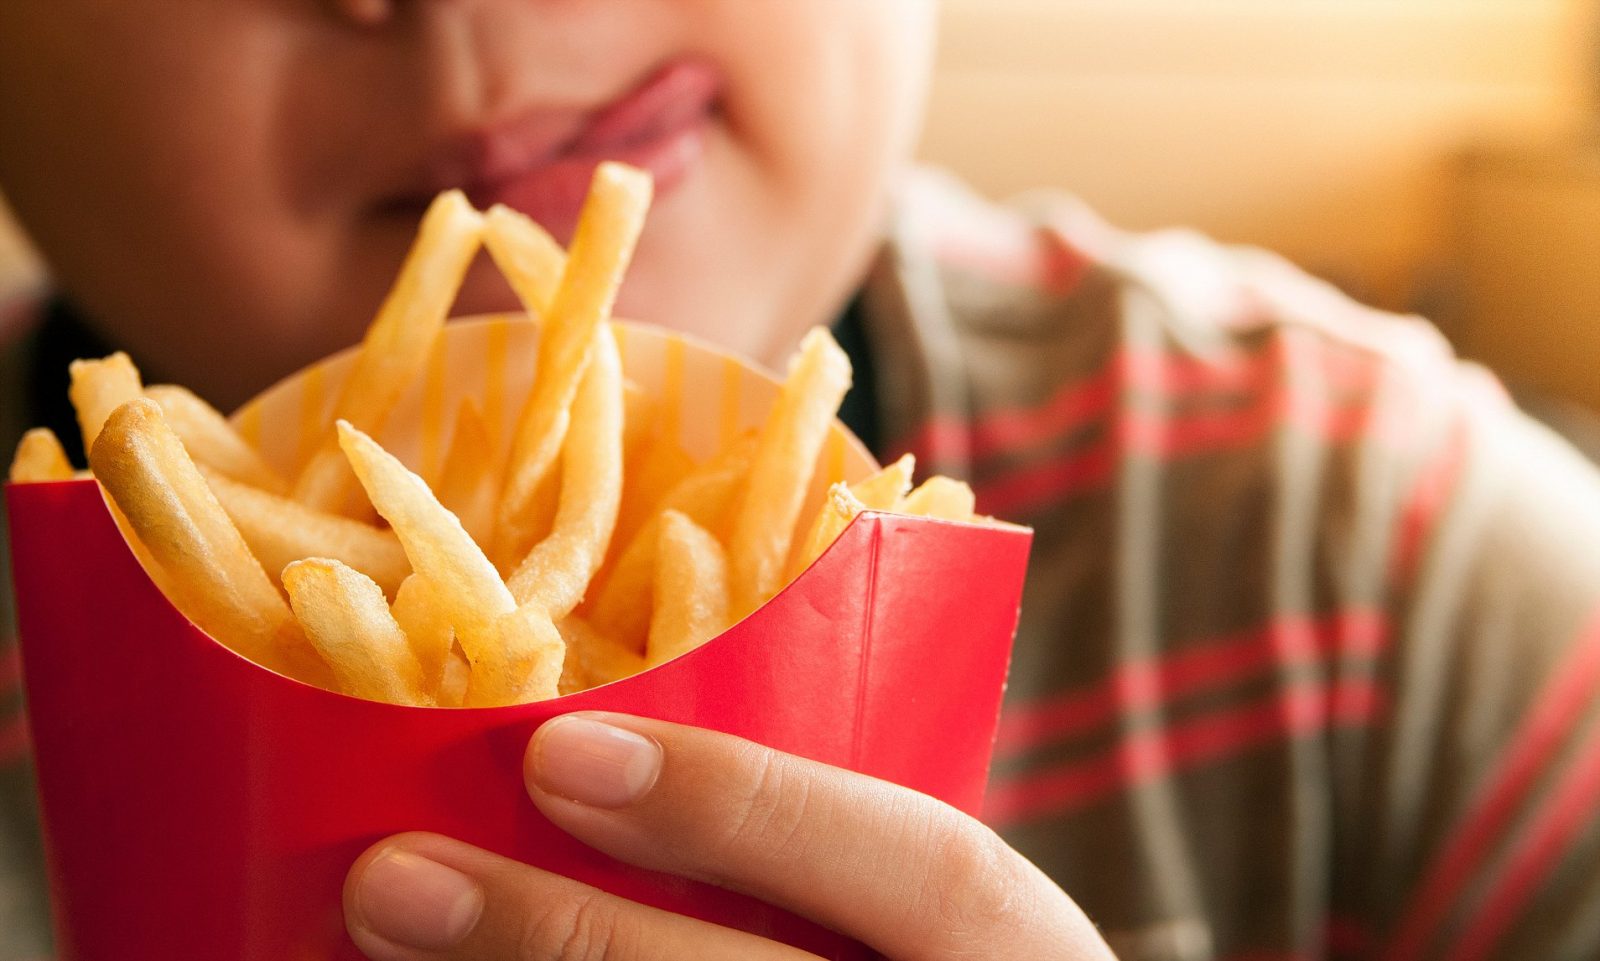 Can We Guess Your Age Based on This “Five Senses” Test? Cropped Image Of Tempted Boy Holding French Fries Packet